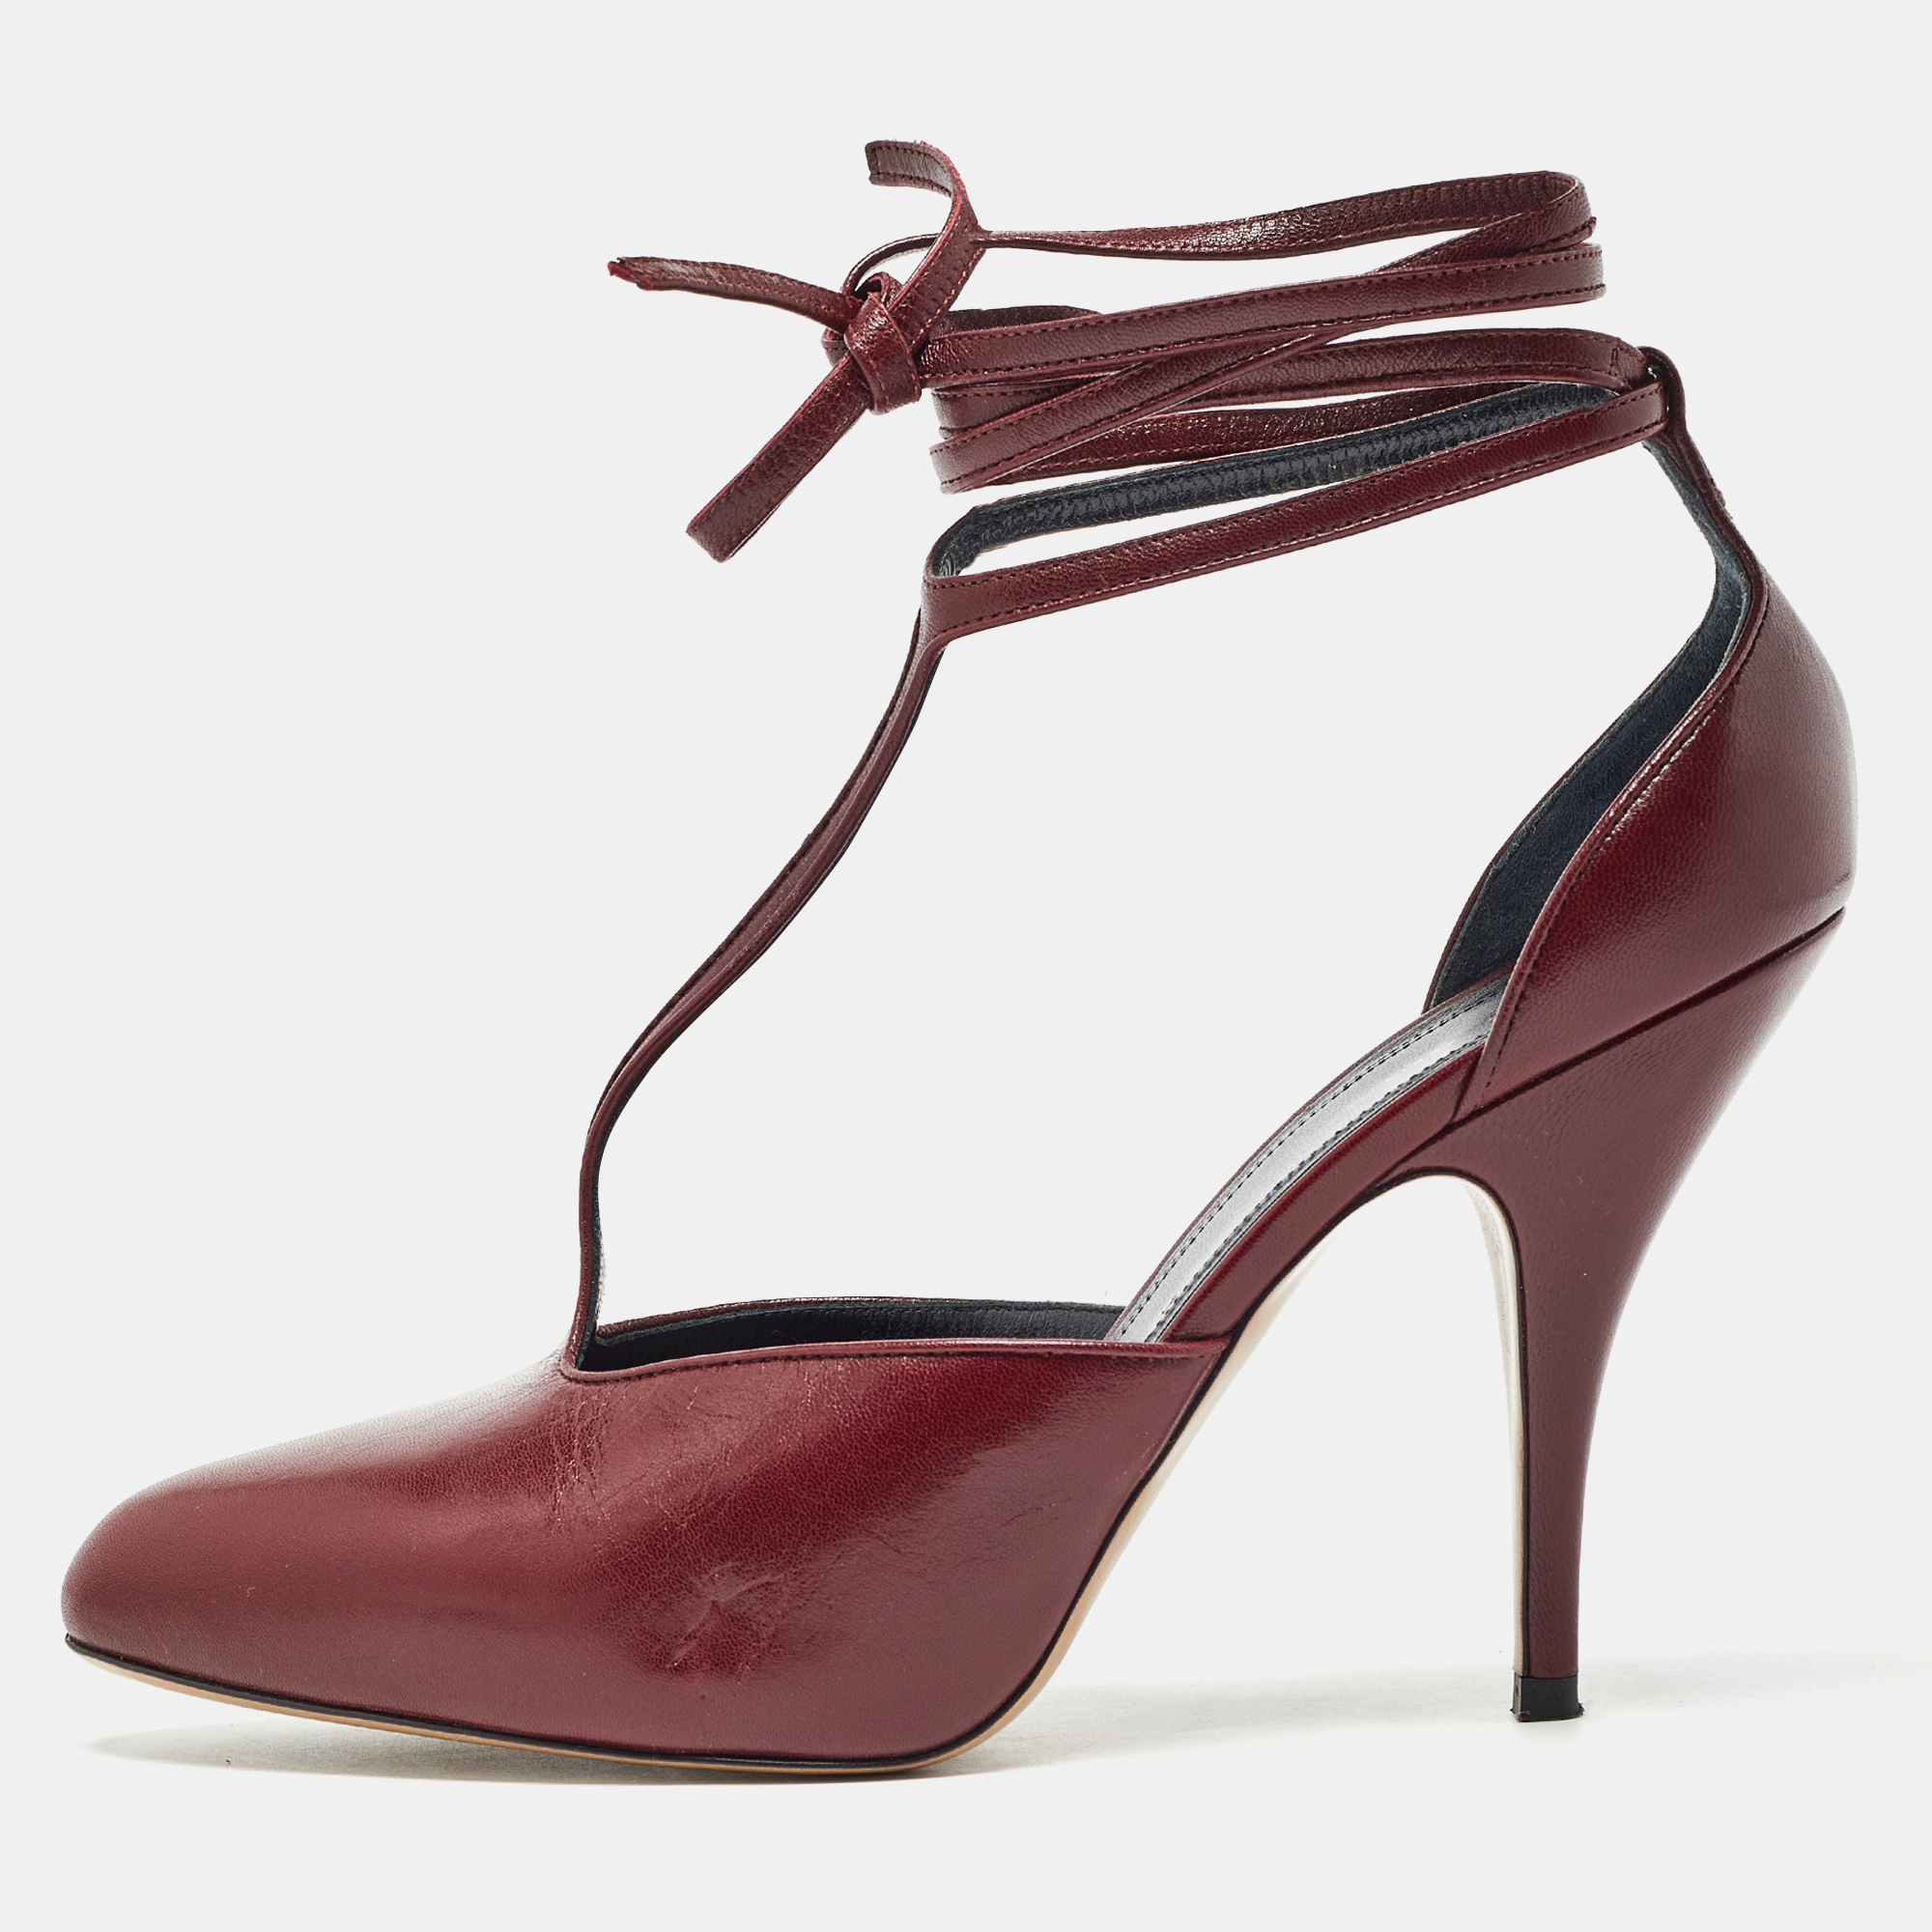 Celine burgundy leather ankle wrap pointed toe pumps size 38.5